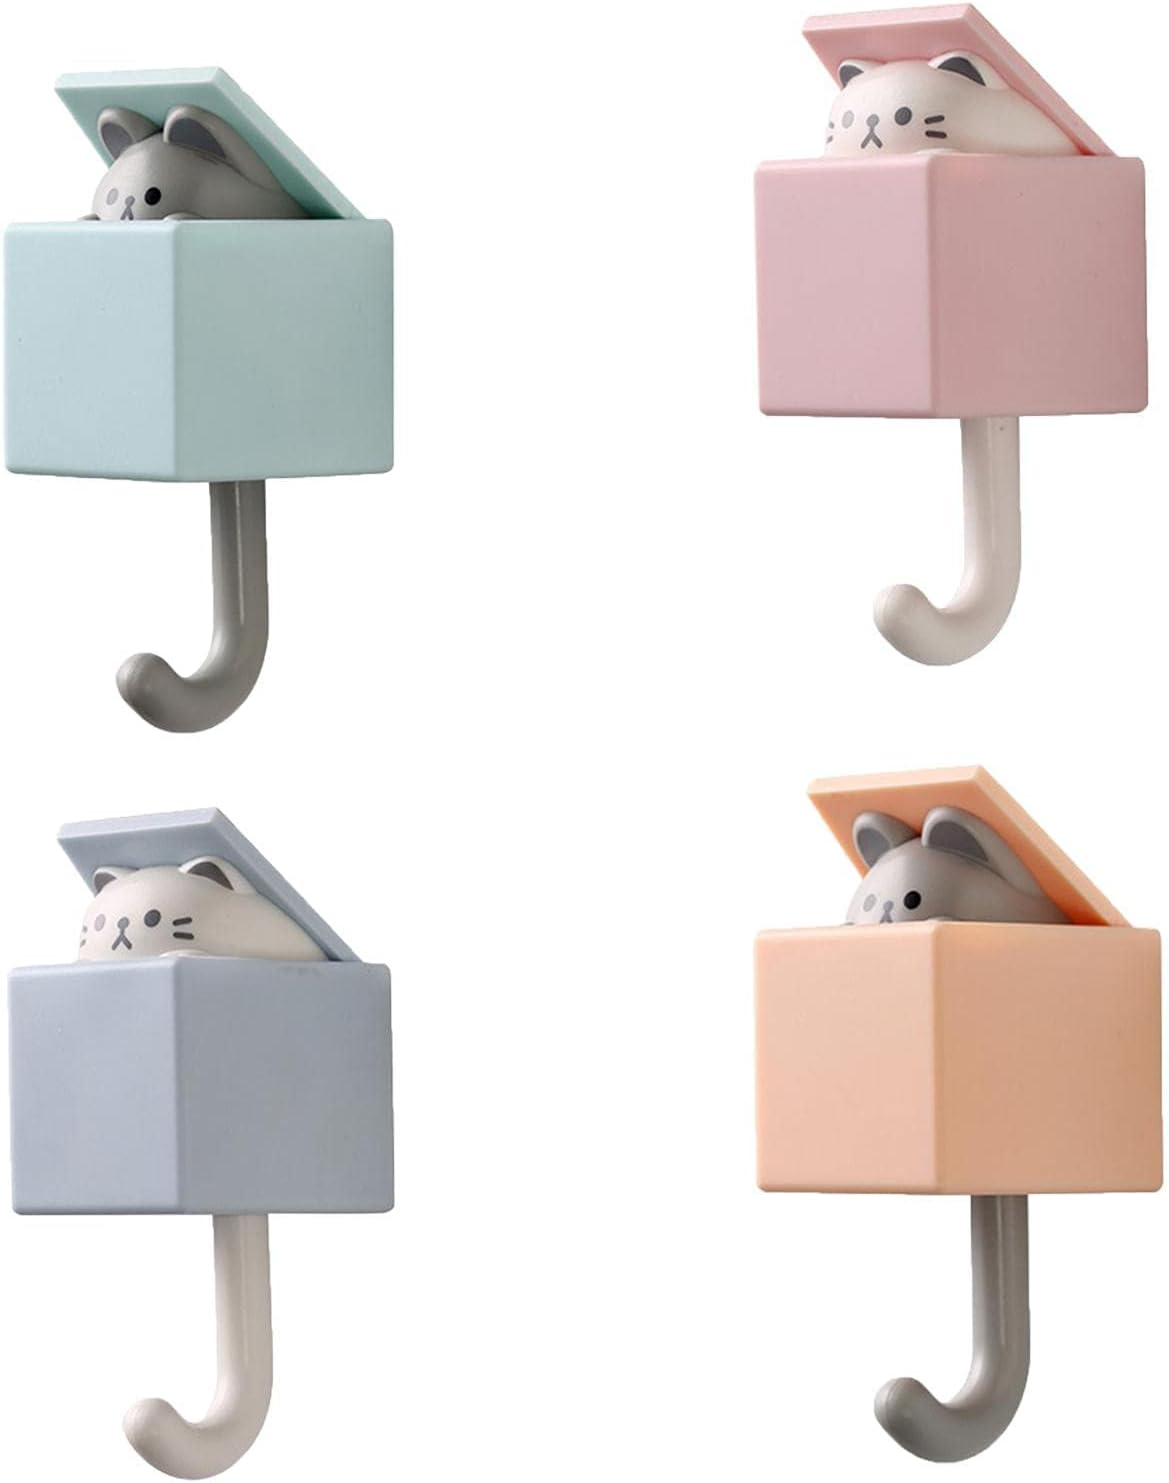 Cat Hook for Wall Hanging - Kitty Holder with Automatic Open and Close